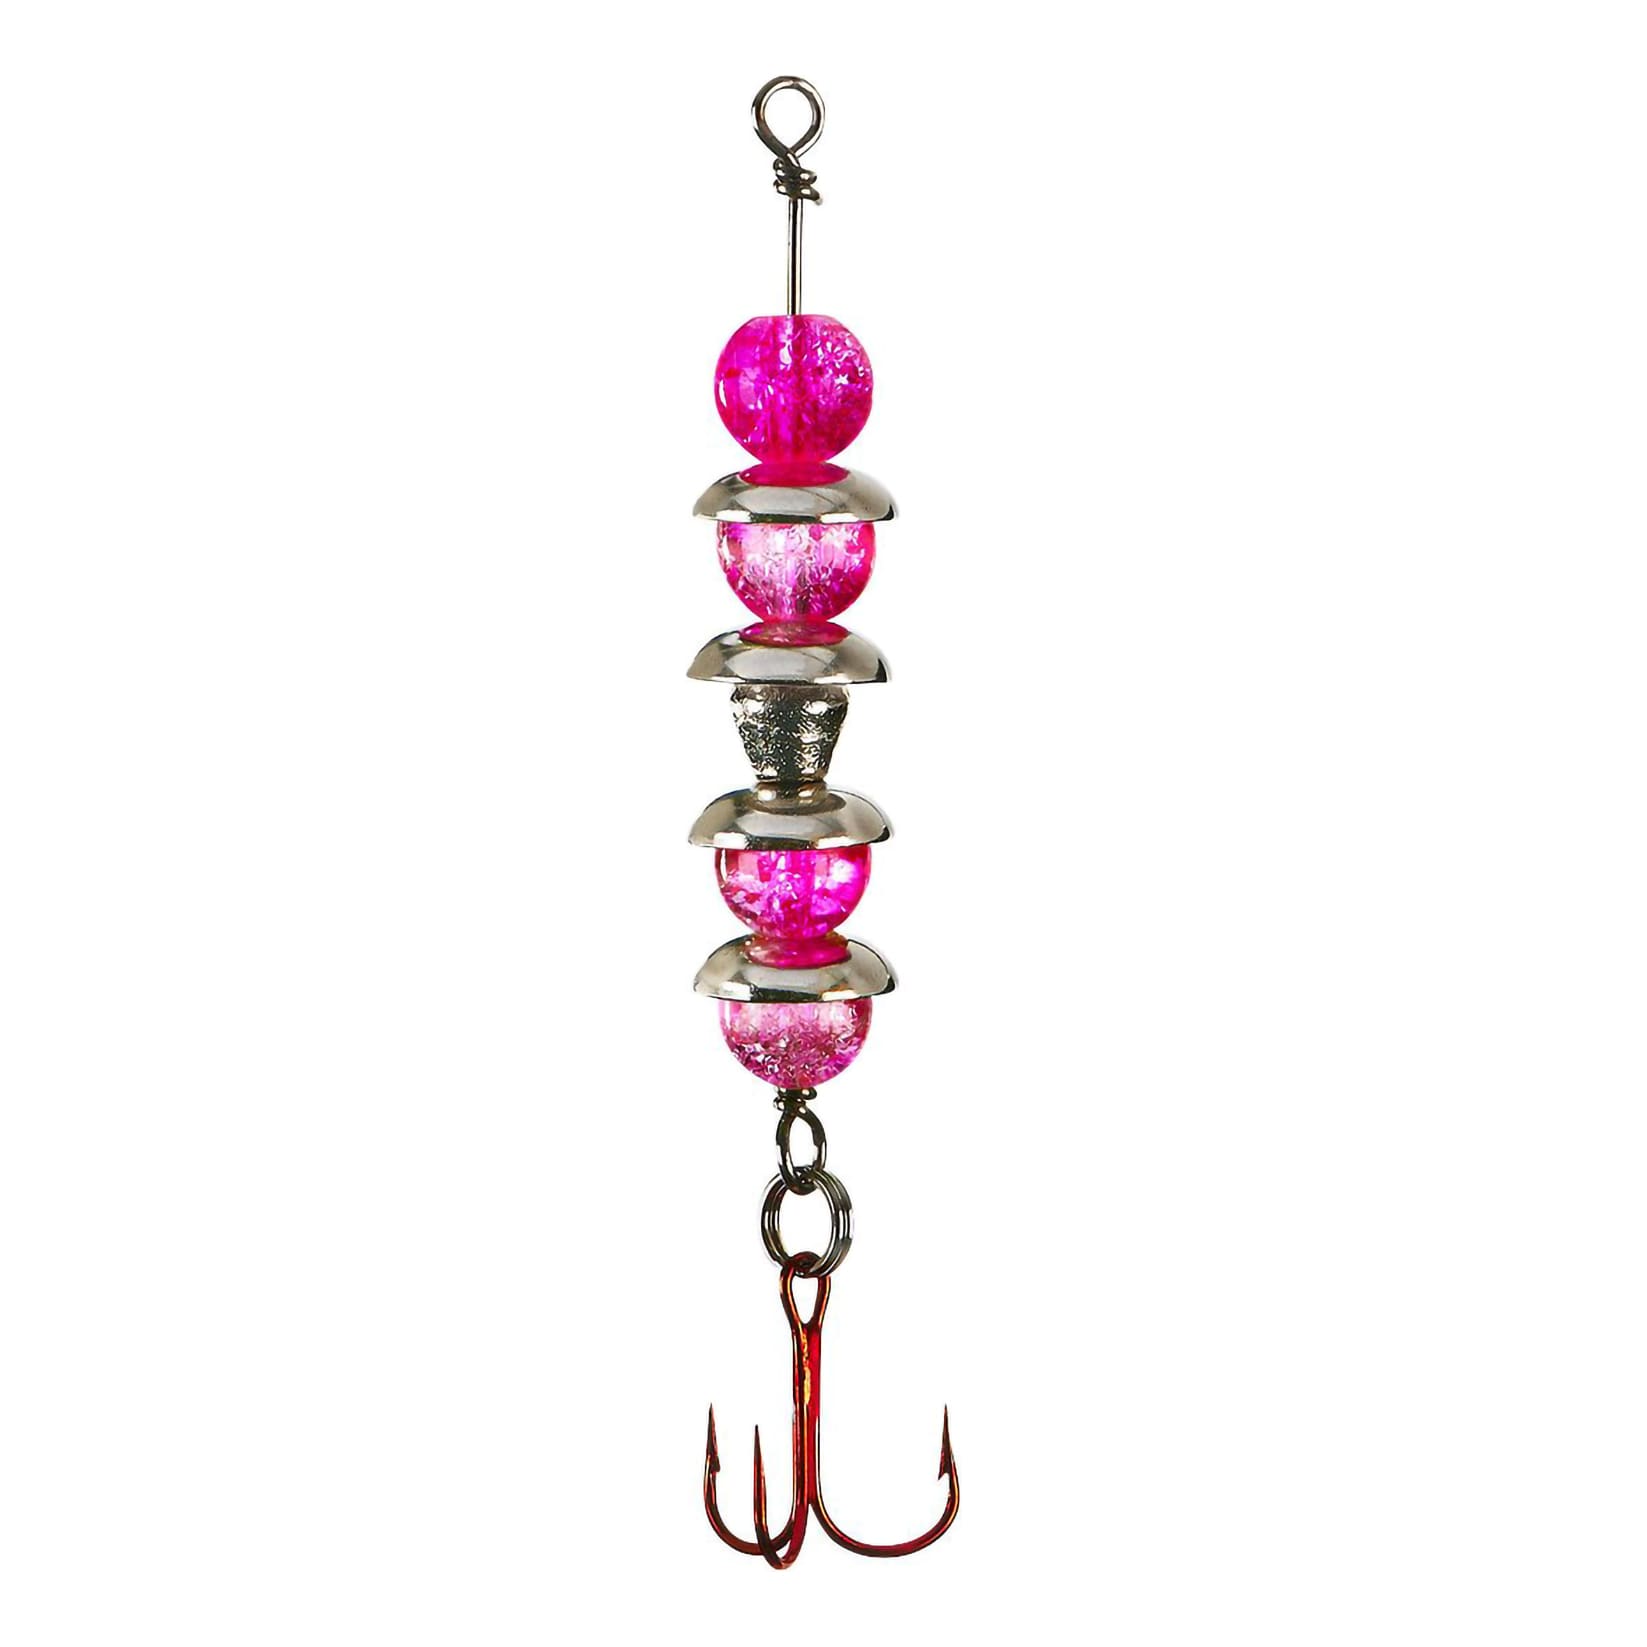 Lindy Ice Wally Talker - Pink Glass - 1/4 oz.